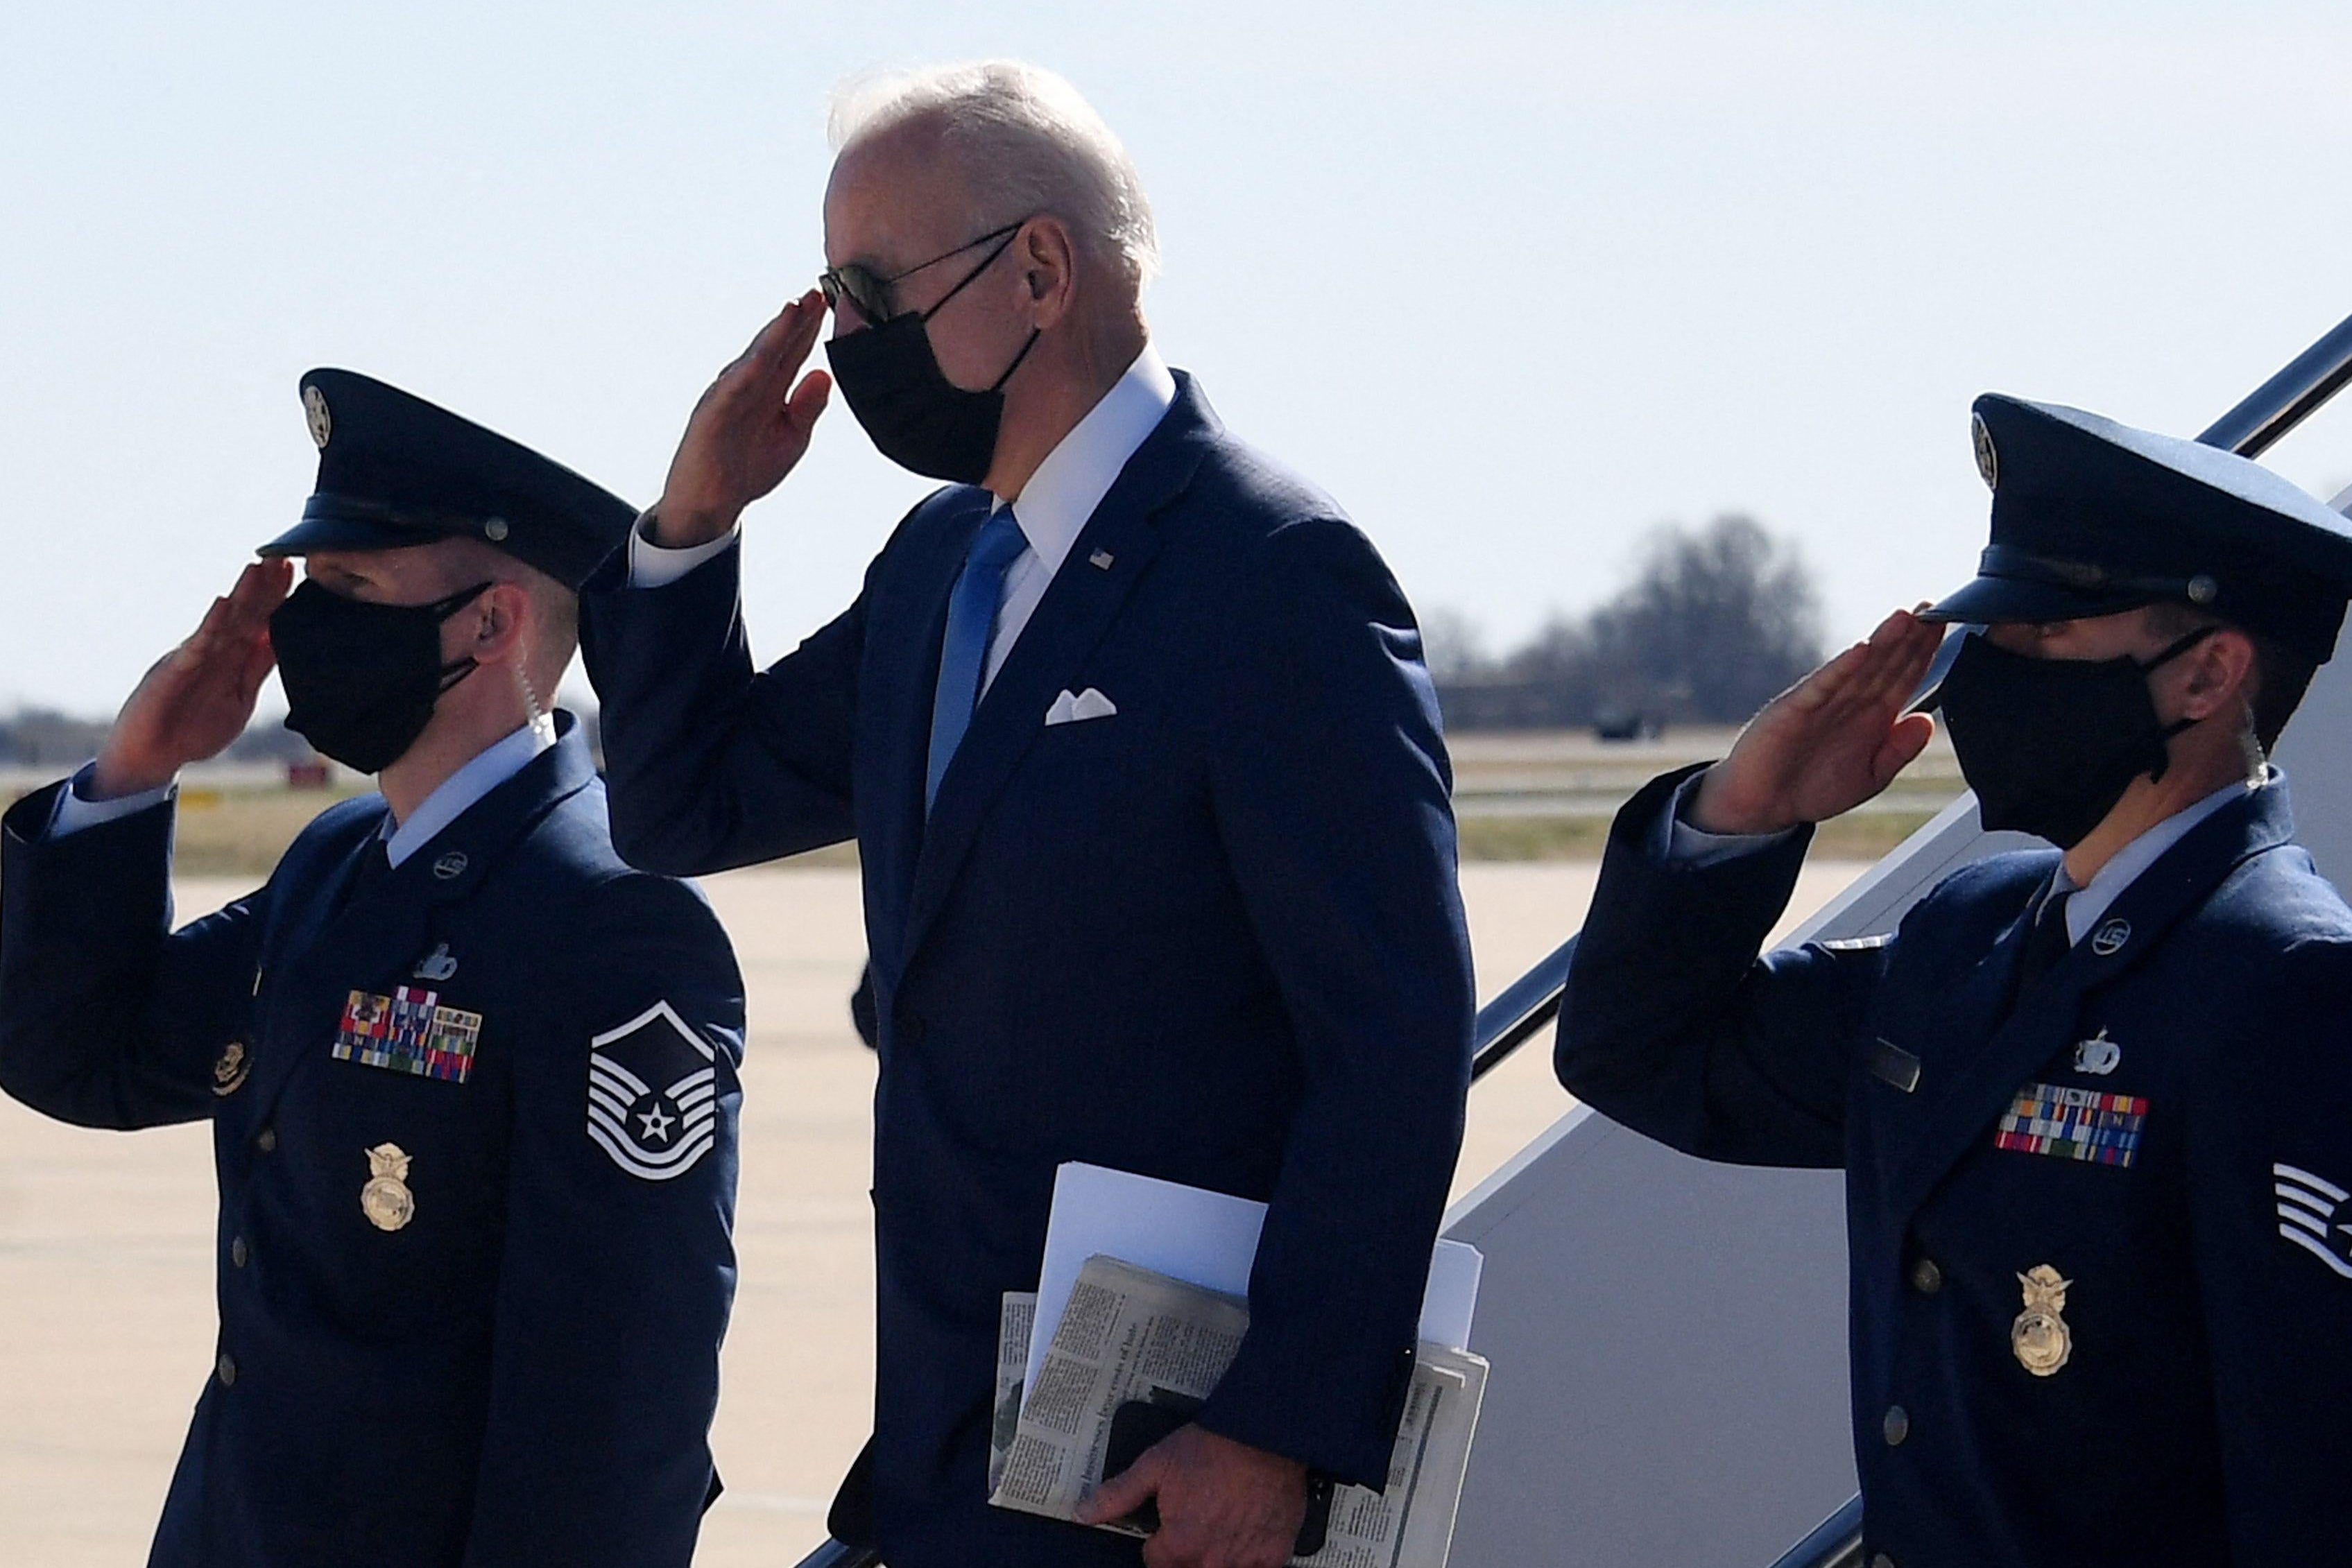 Biden salutes as he disembarks from Air Dorce One, two officers around him saluting, too.